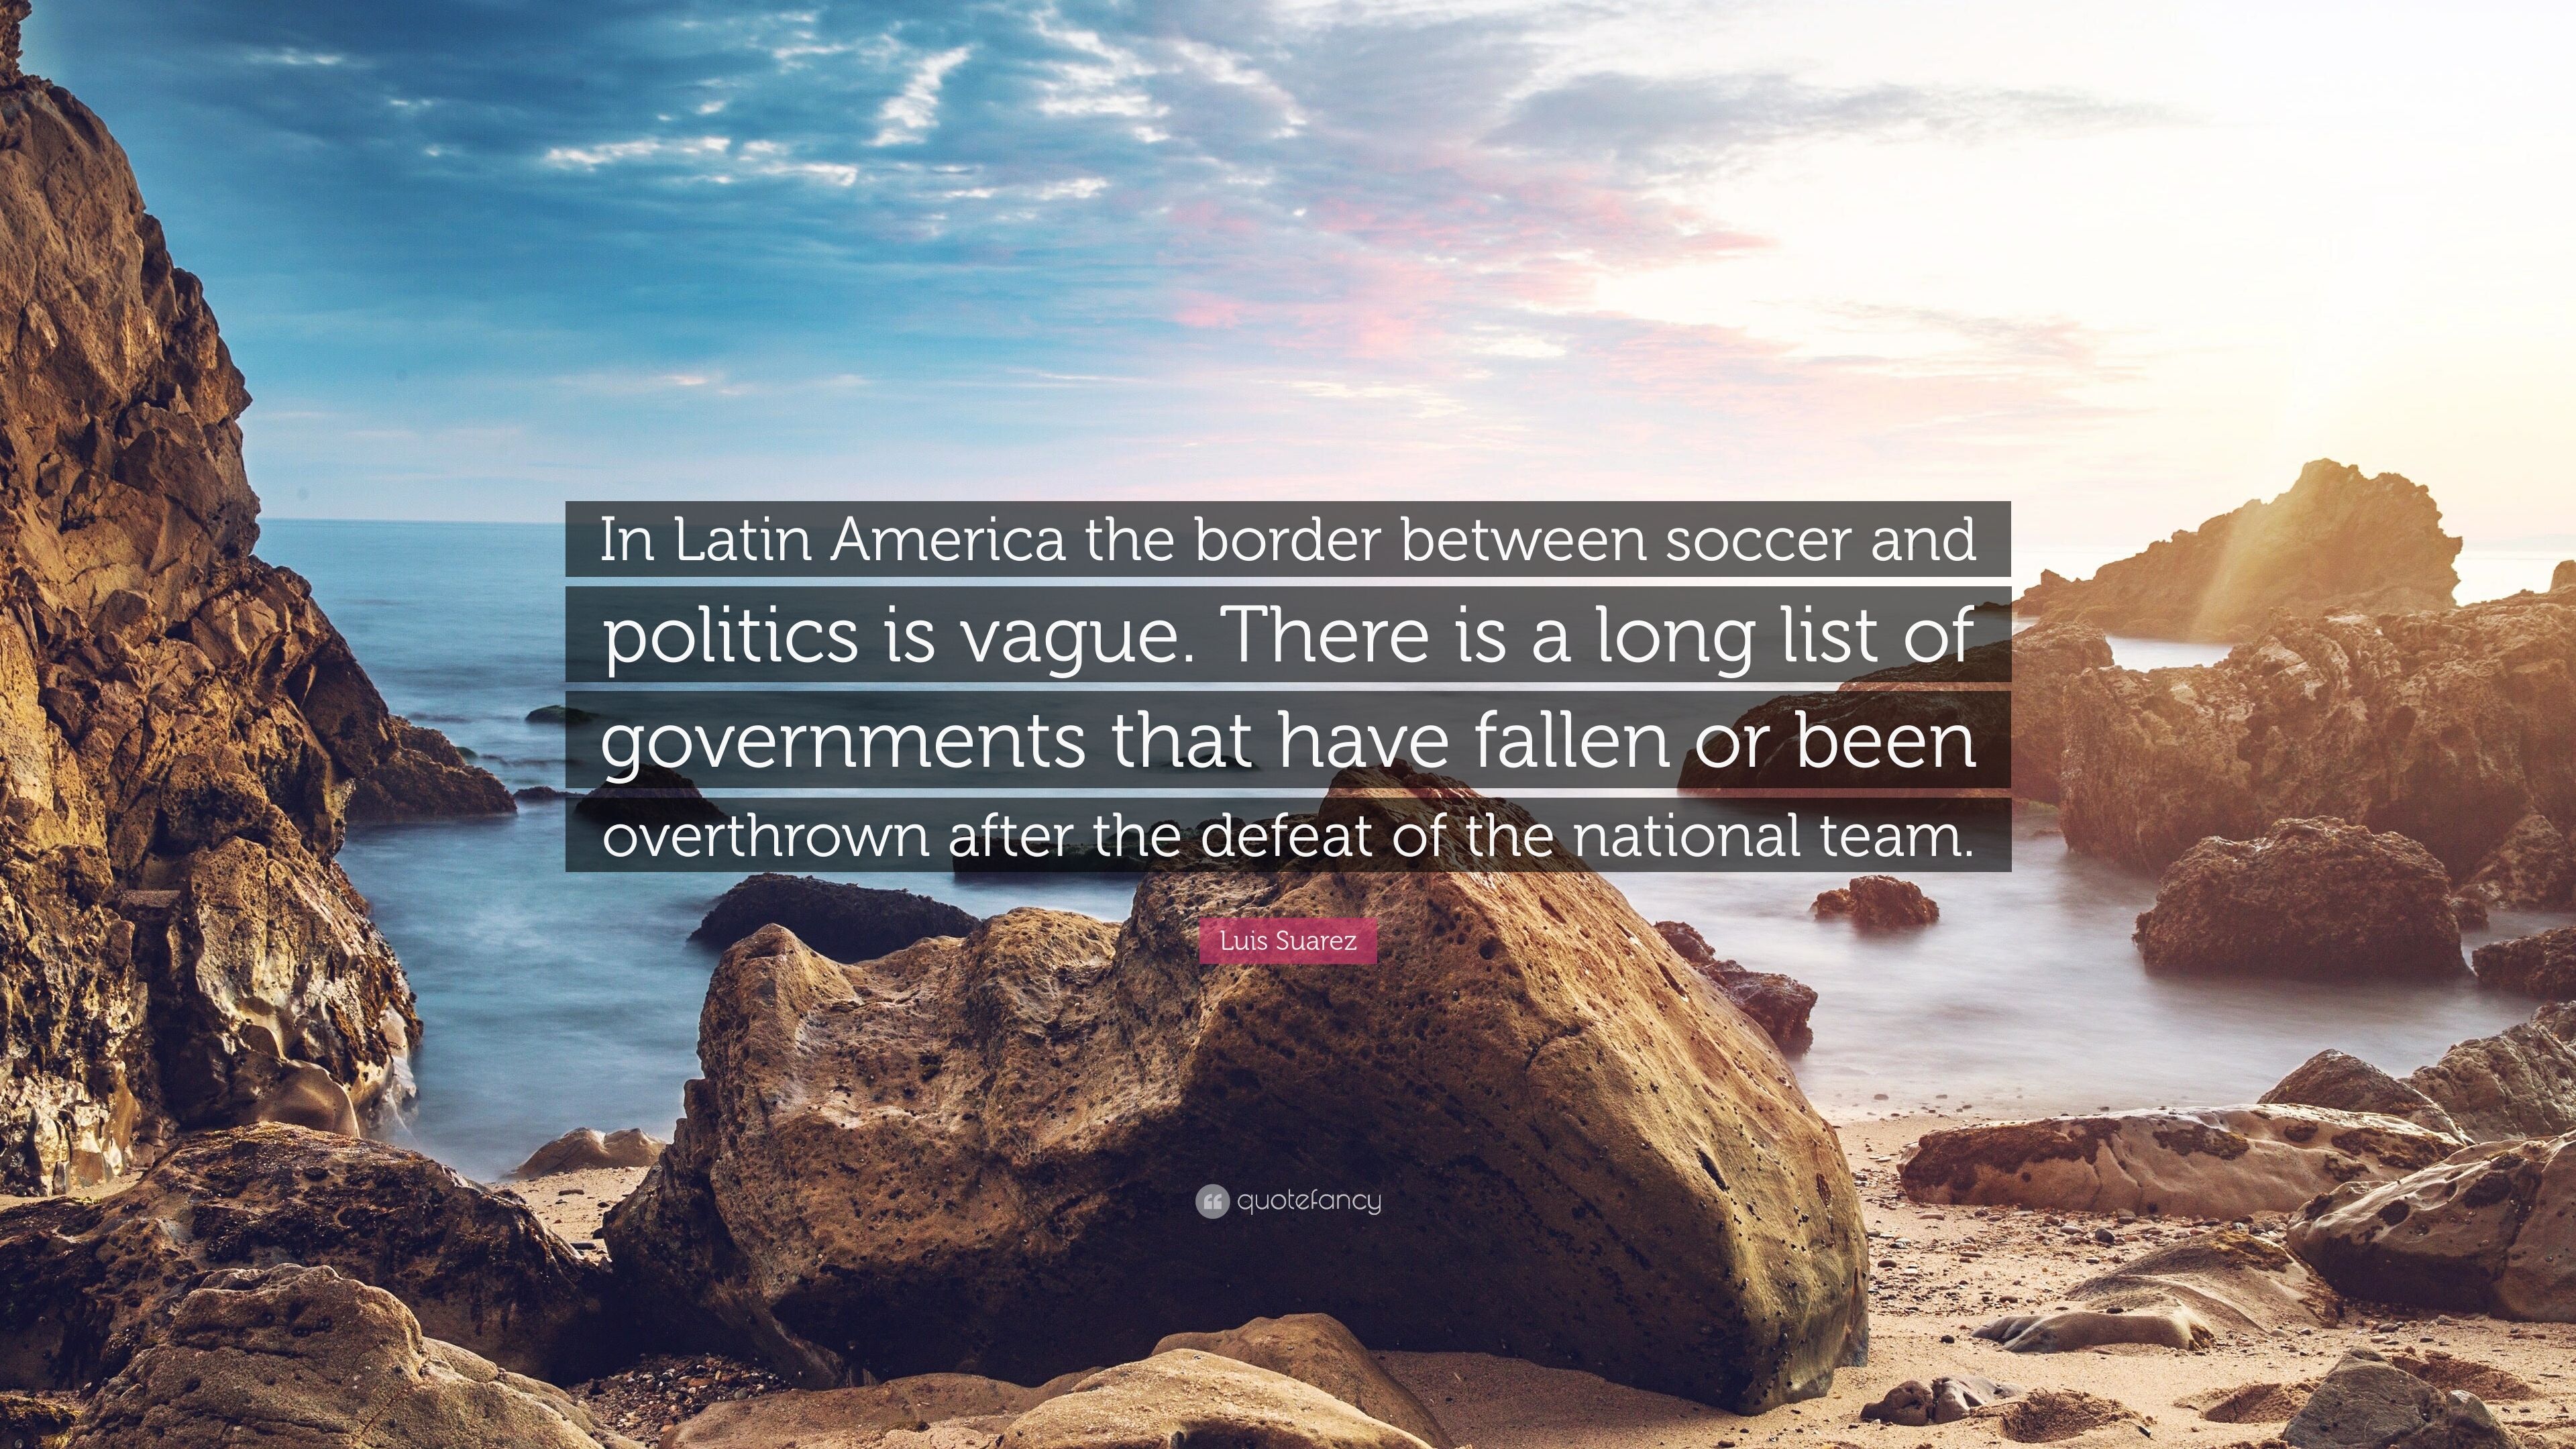 Luis Suarez Quote: “In Latin America the border between soccer